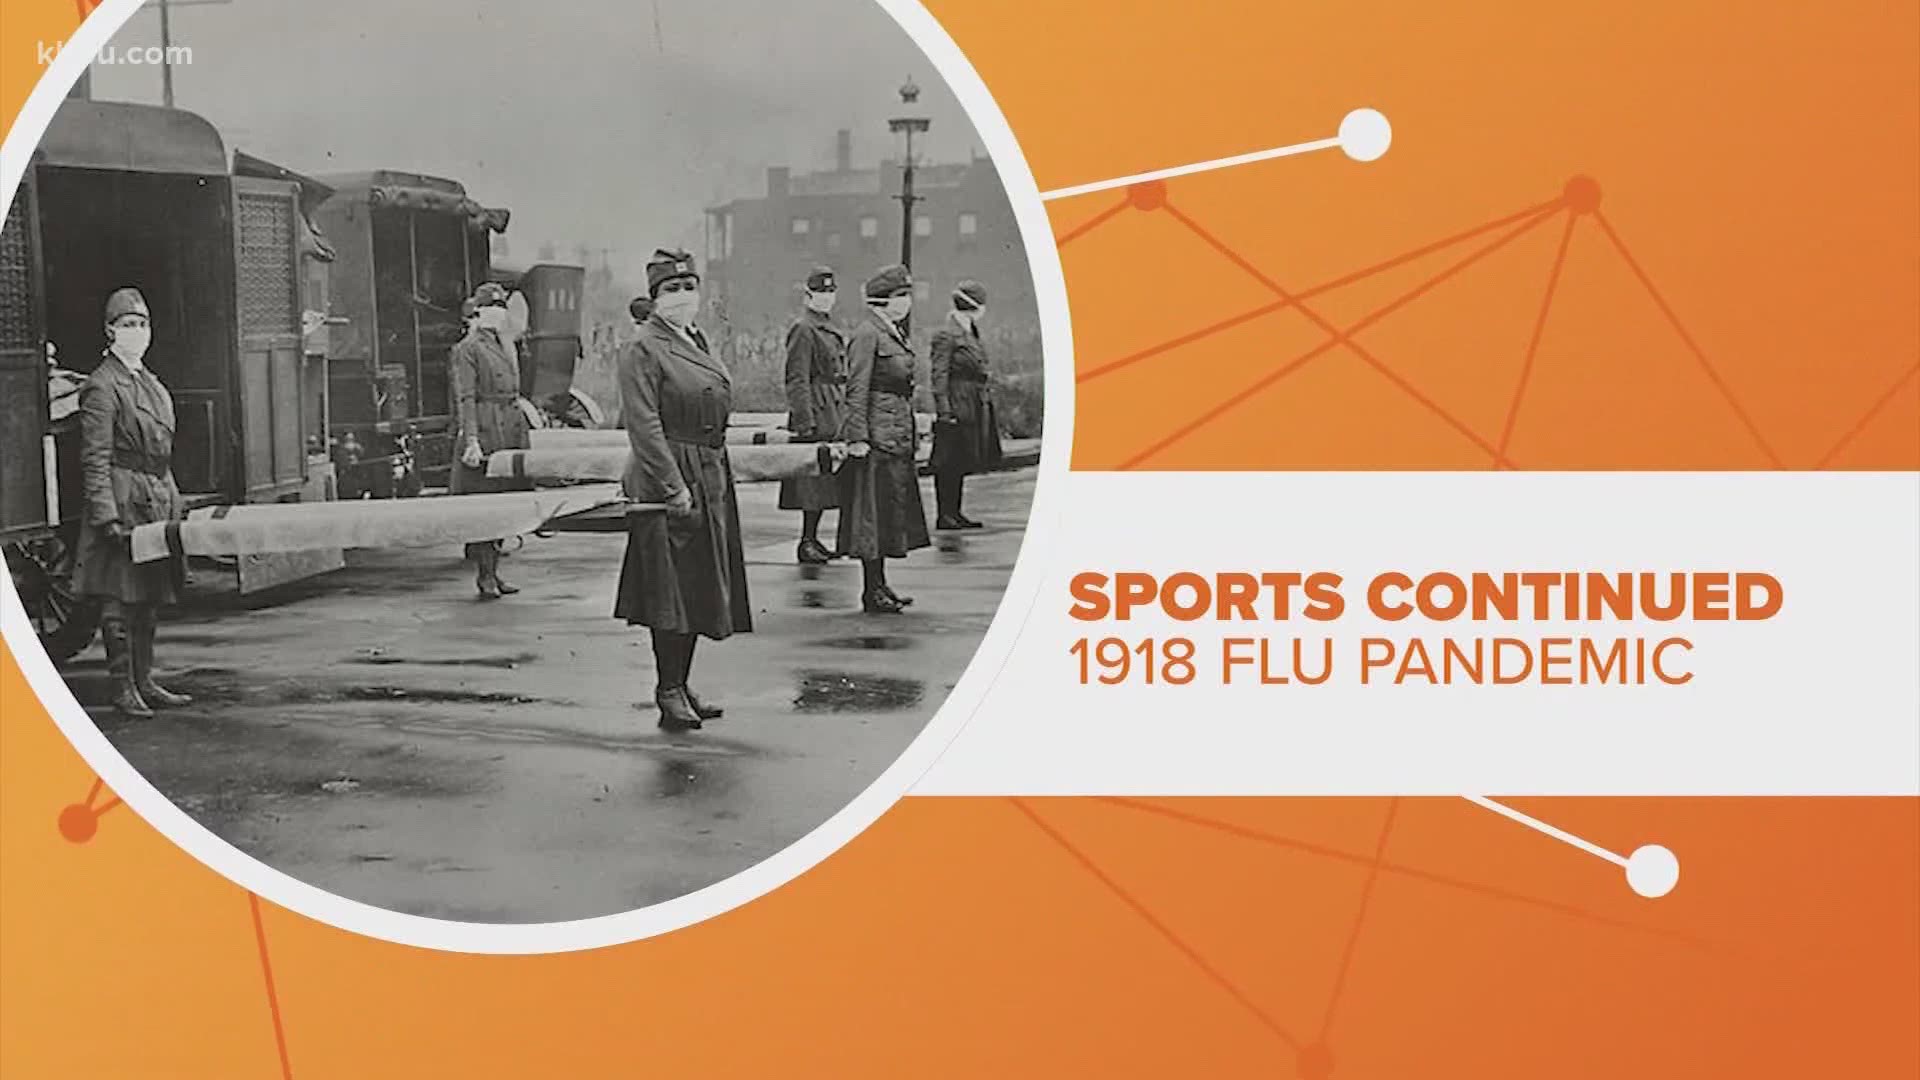 As baseball season starts, there is still a lot of uncertainty about how games will operate amid the COVID-19 pandemic. But here's what we learned from the past.